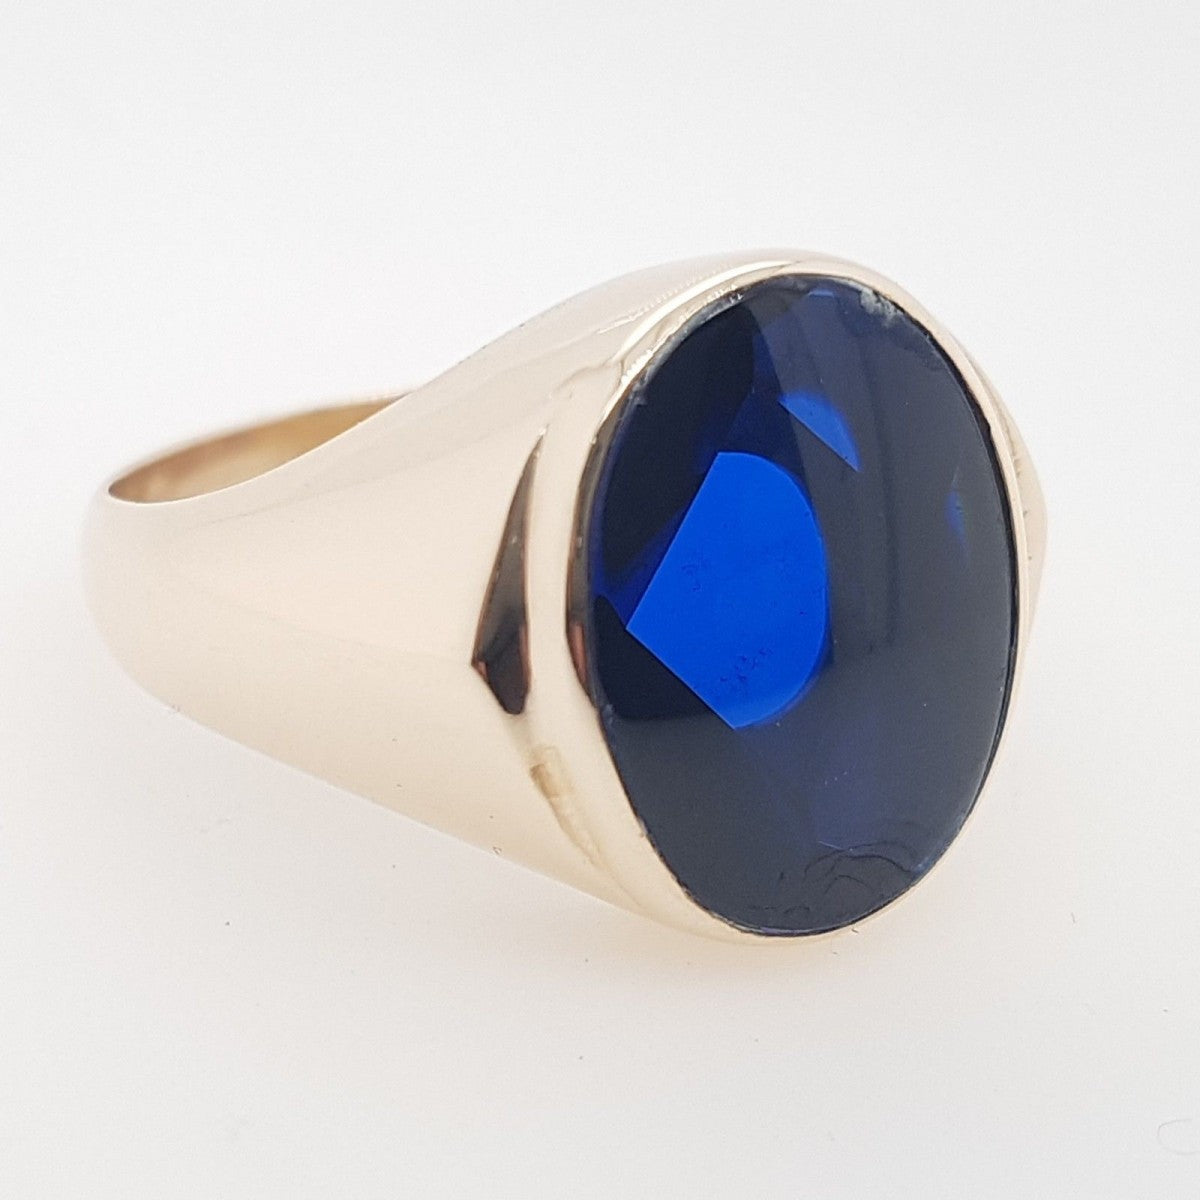 Vintage Gents 9ct Gold Oval Created Sapphire Signet Ring [Preloved]